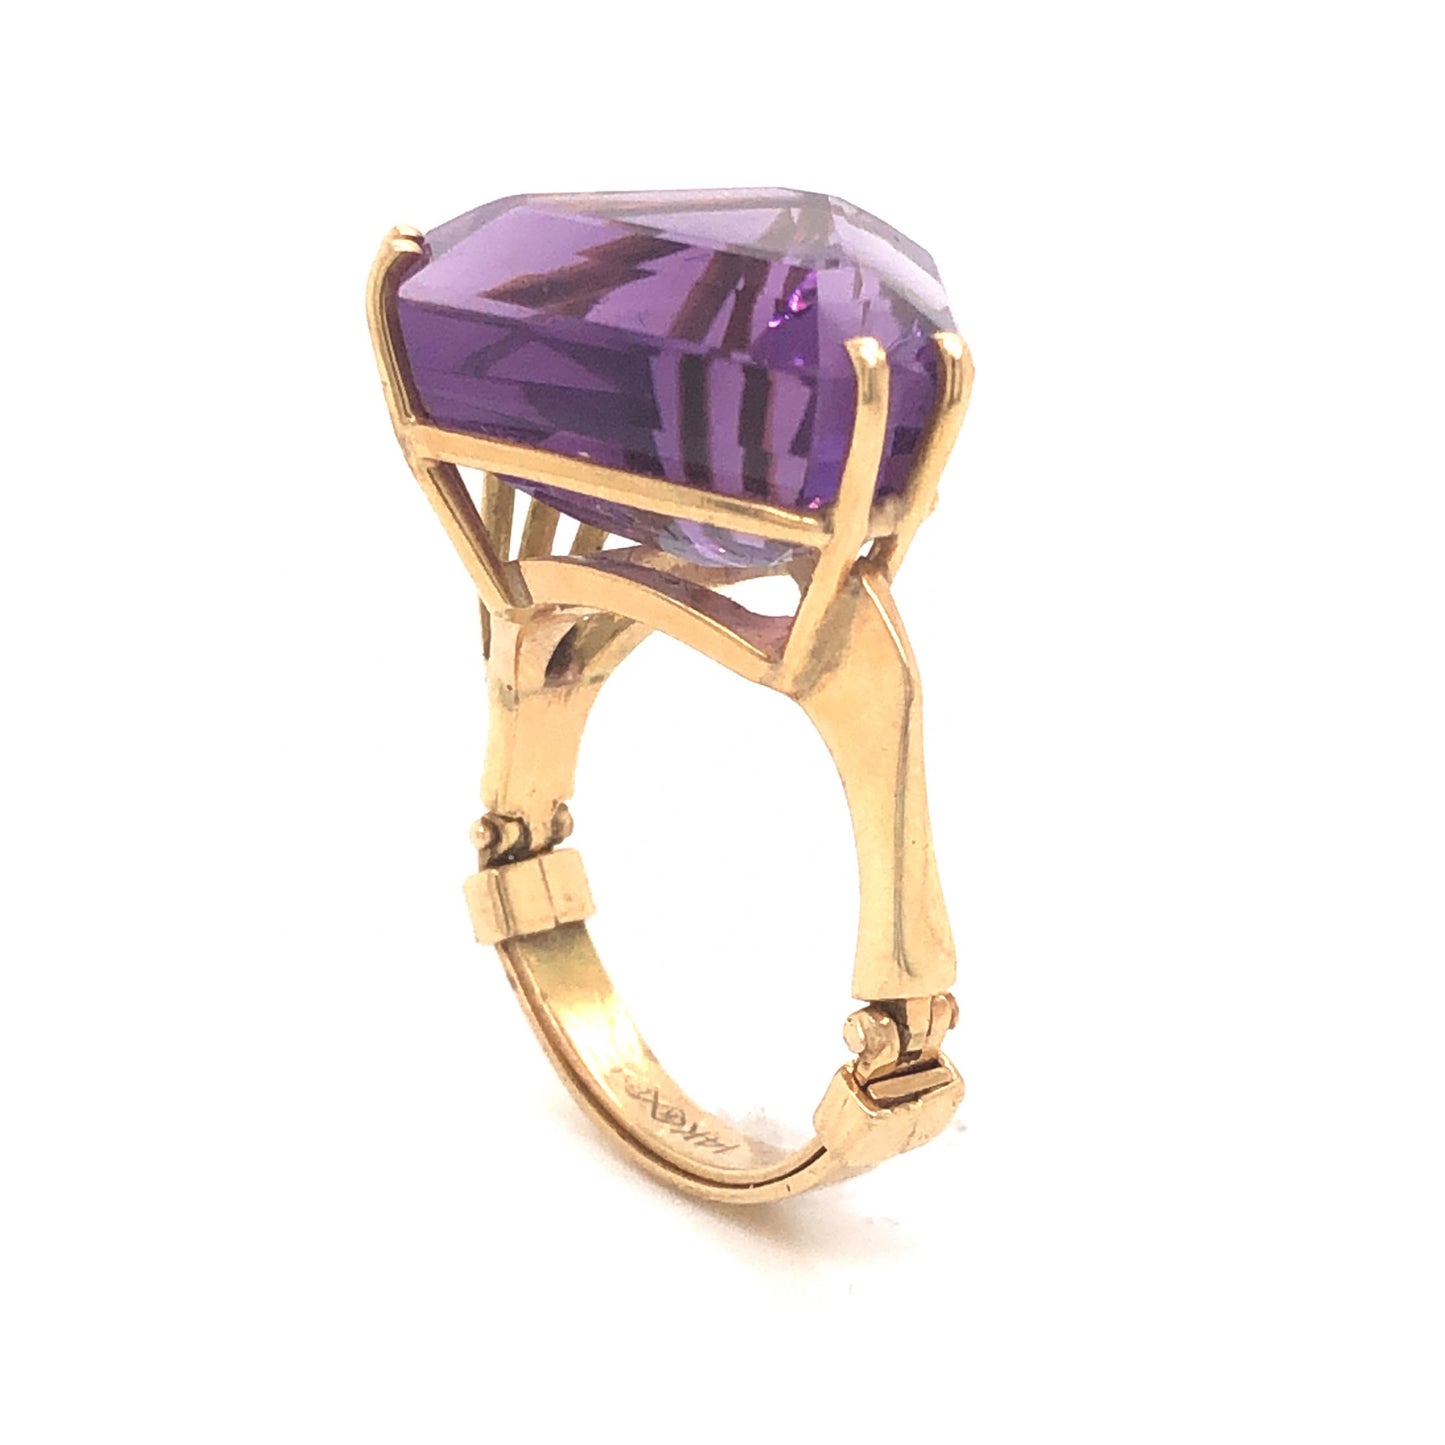 Triangular Amethyst Cocktail Ring in 14k Yellow Gold